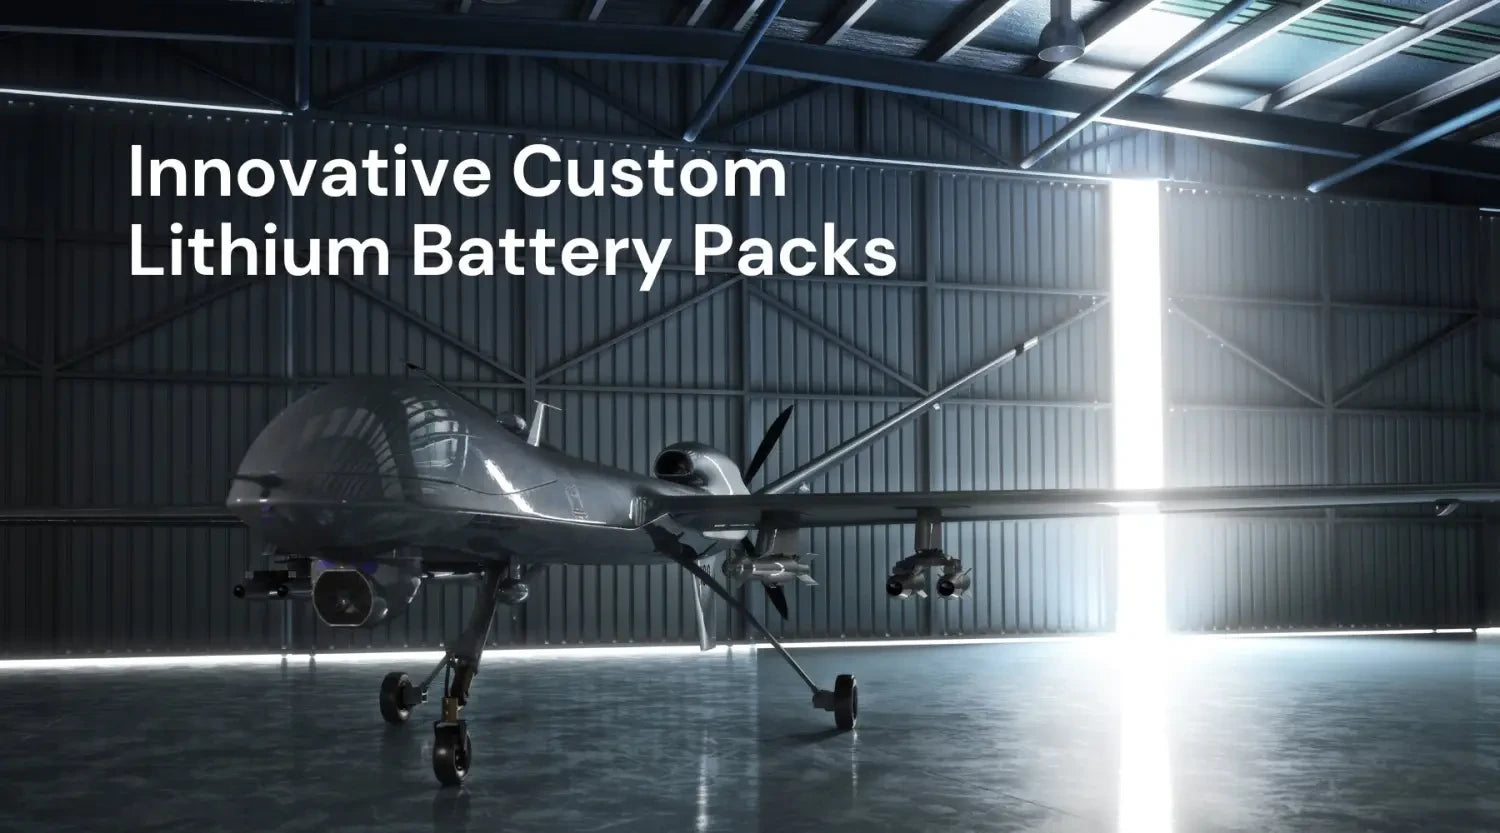 Lithium Battery Co is the Leader in Custom Lithium Battery Packs - LITHIUM BATTERY CO